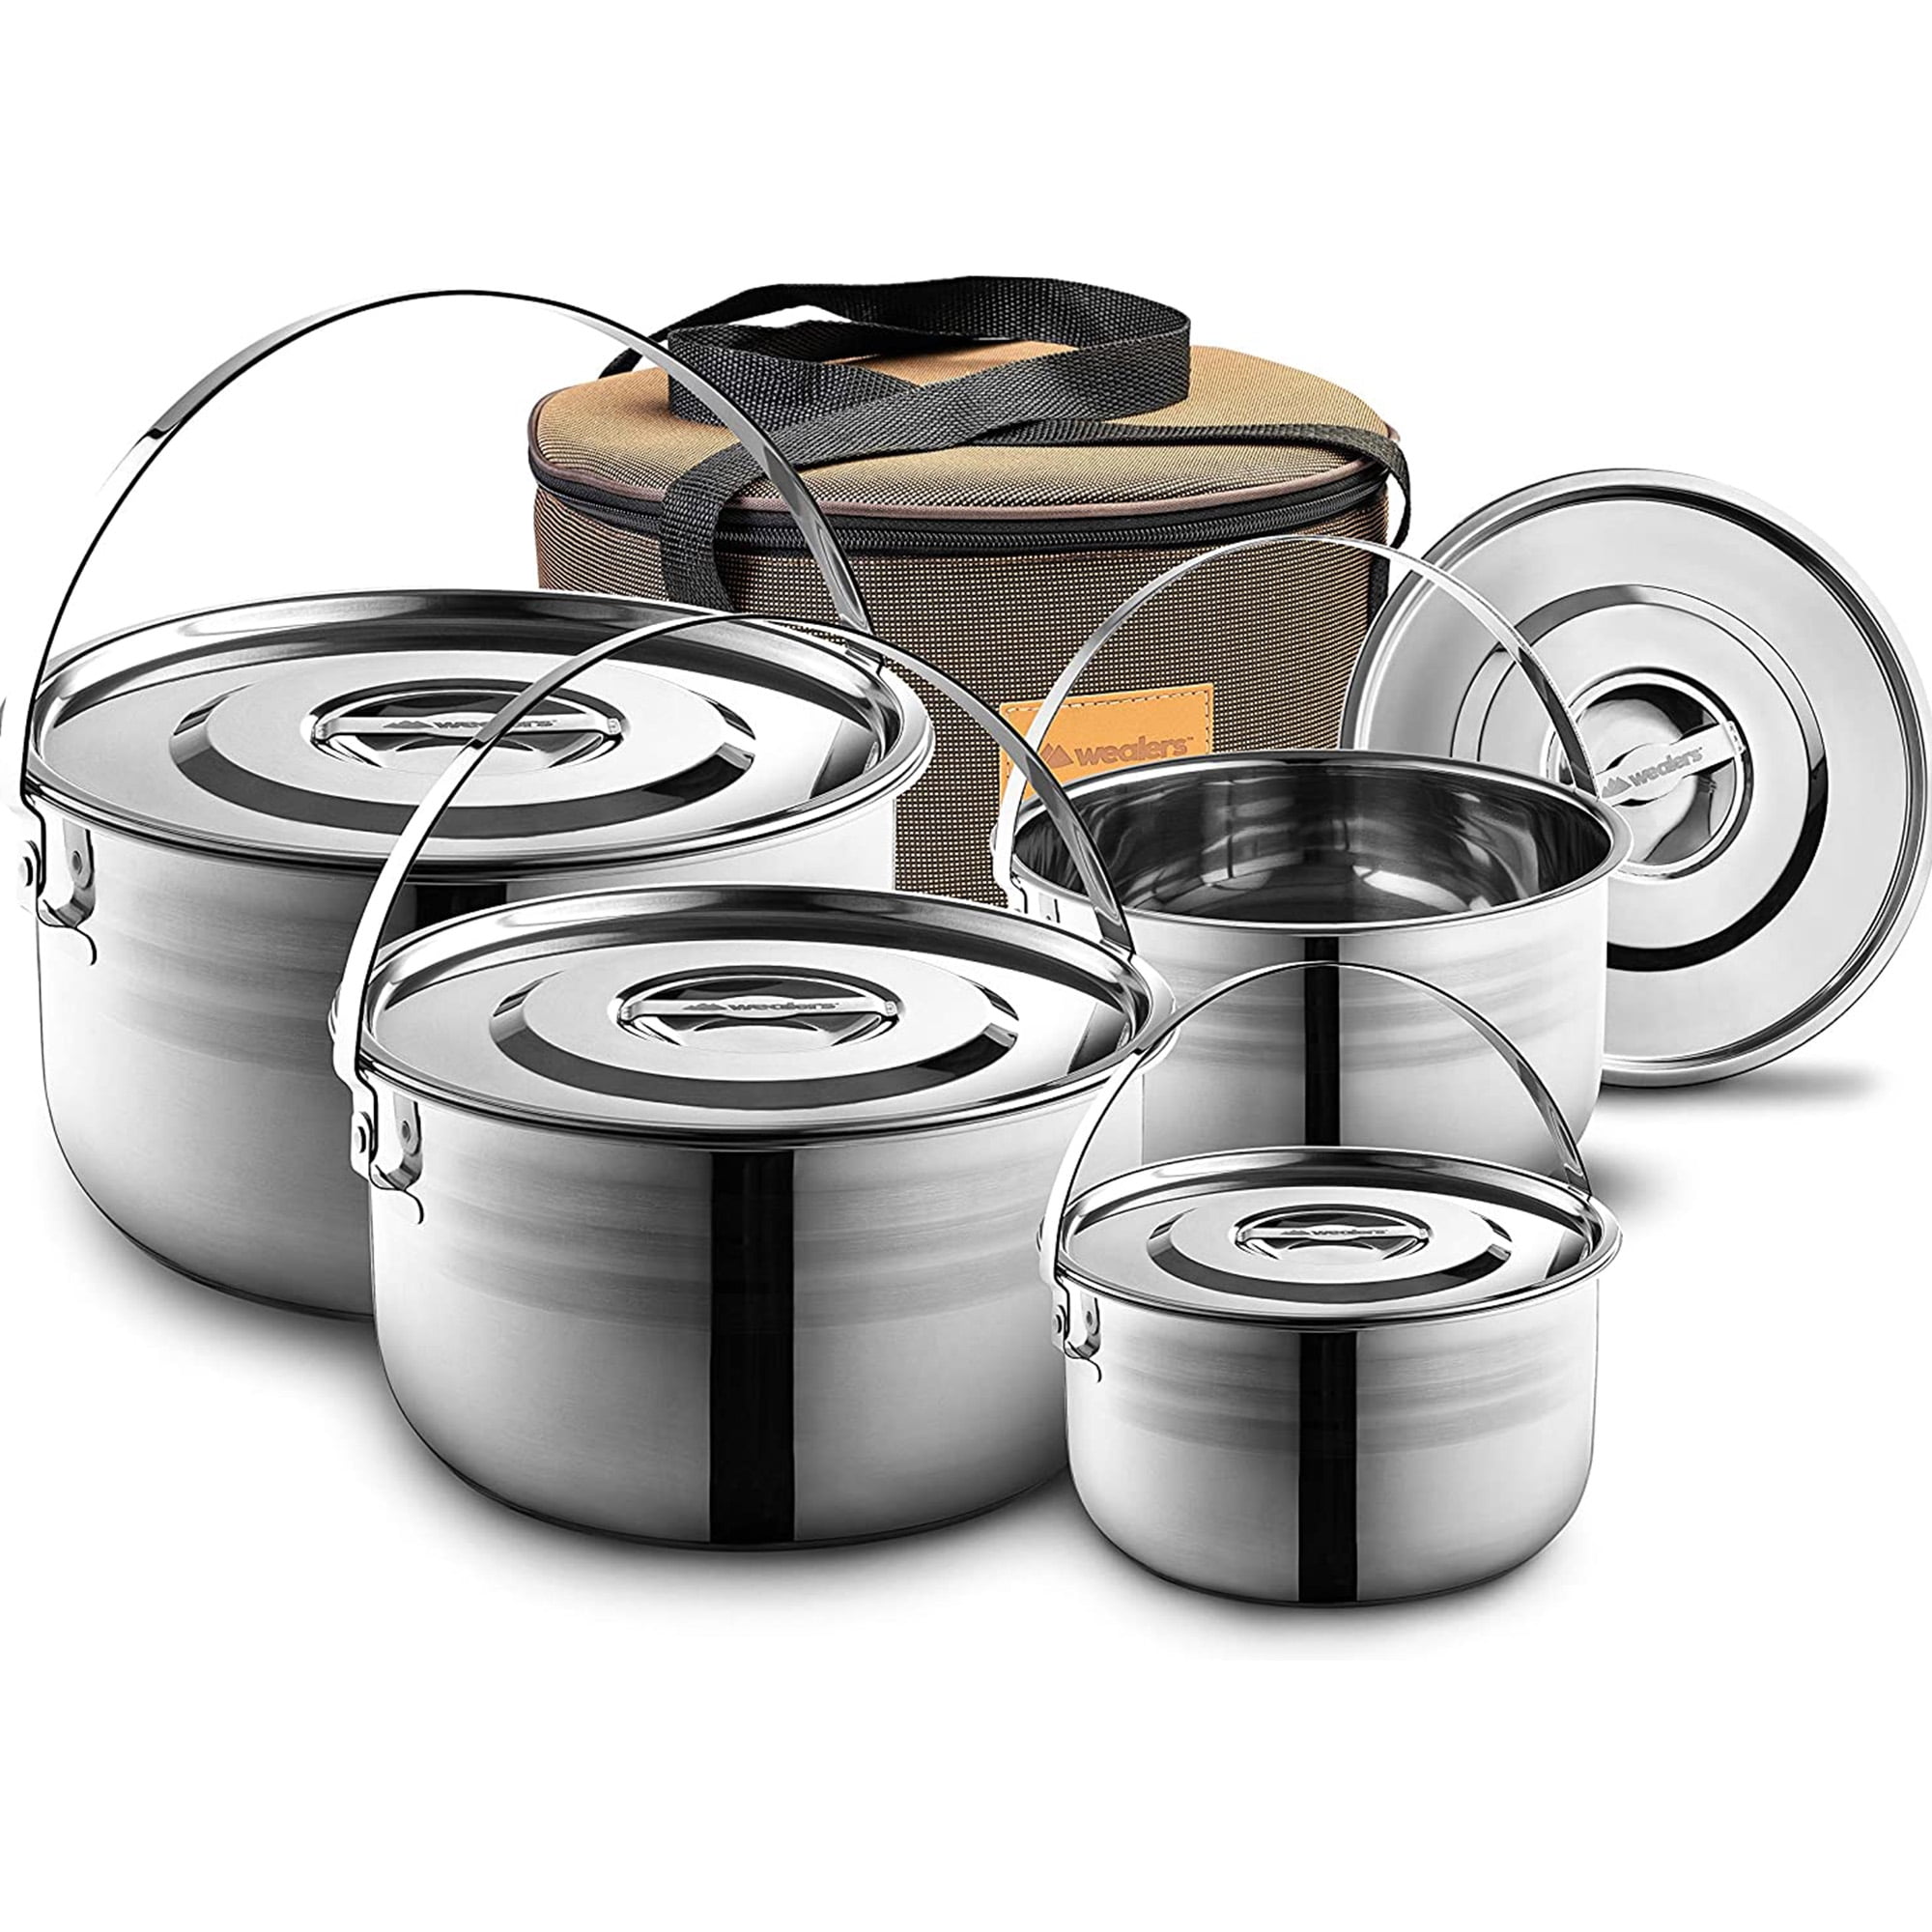 CretFine 304 Stainless Steel Camping Cookware Set with Portable